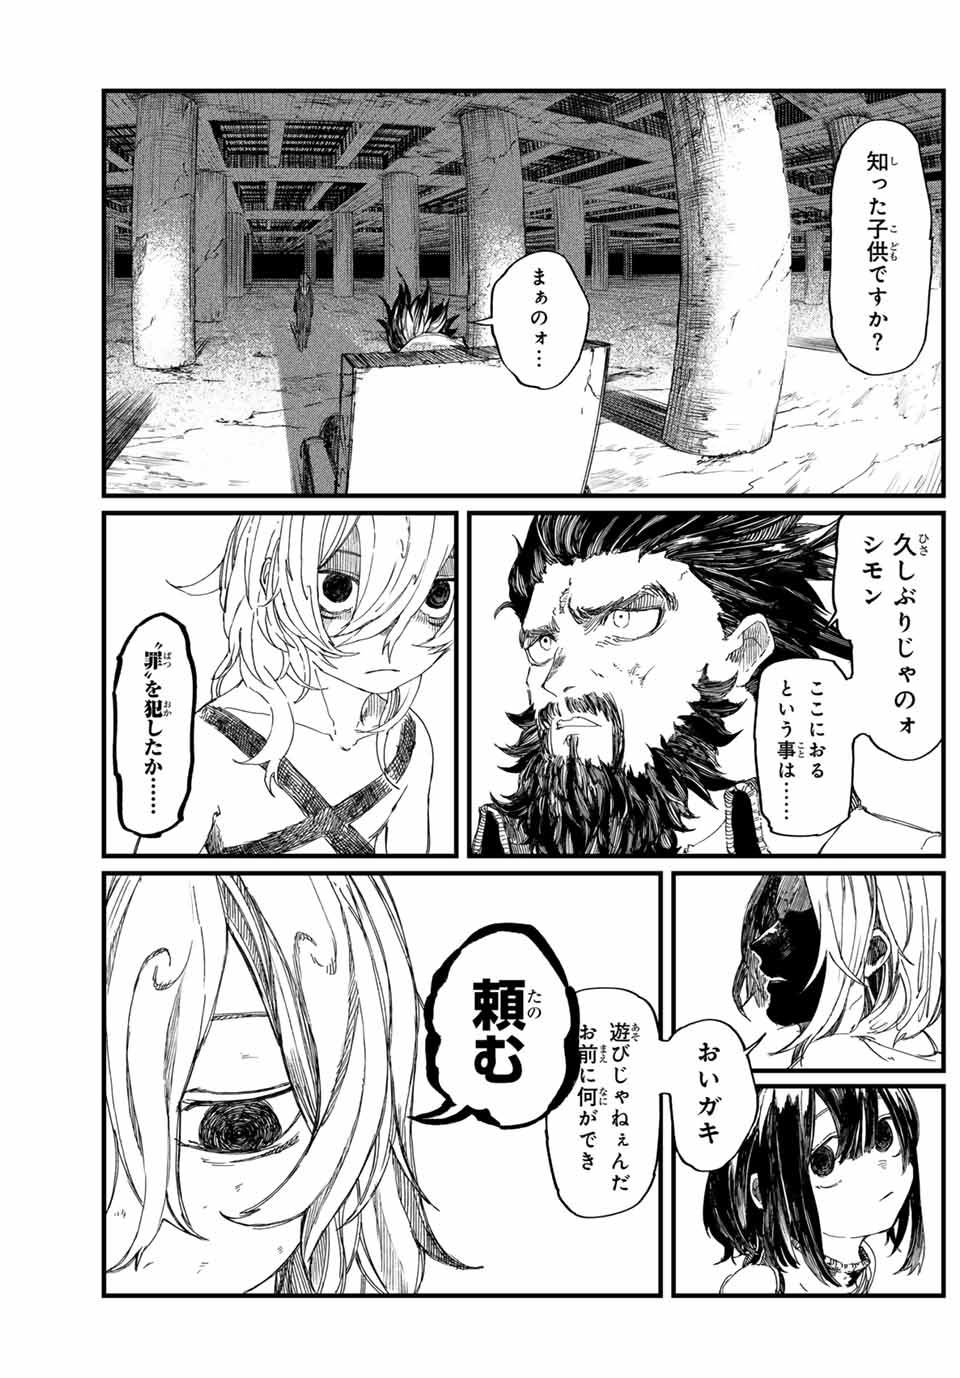 MAN OF RUST 第17話 - Page 3